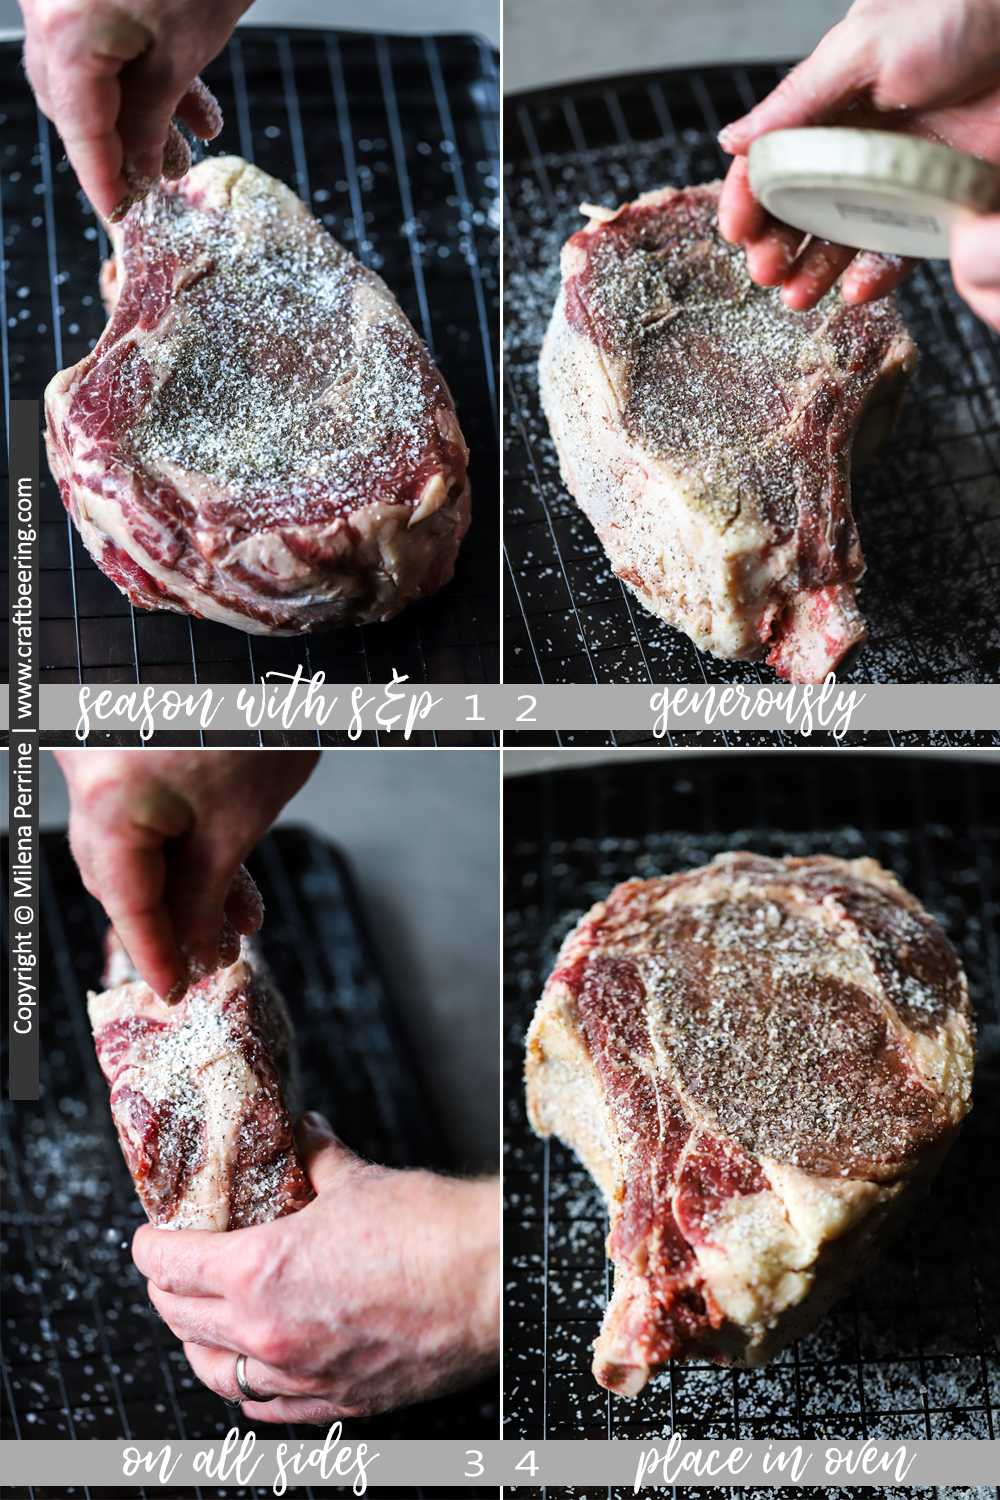 Step by step how to prepare a cowboy steak for cooking.